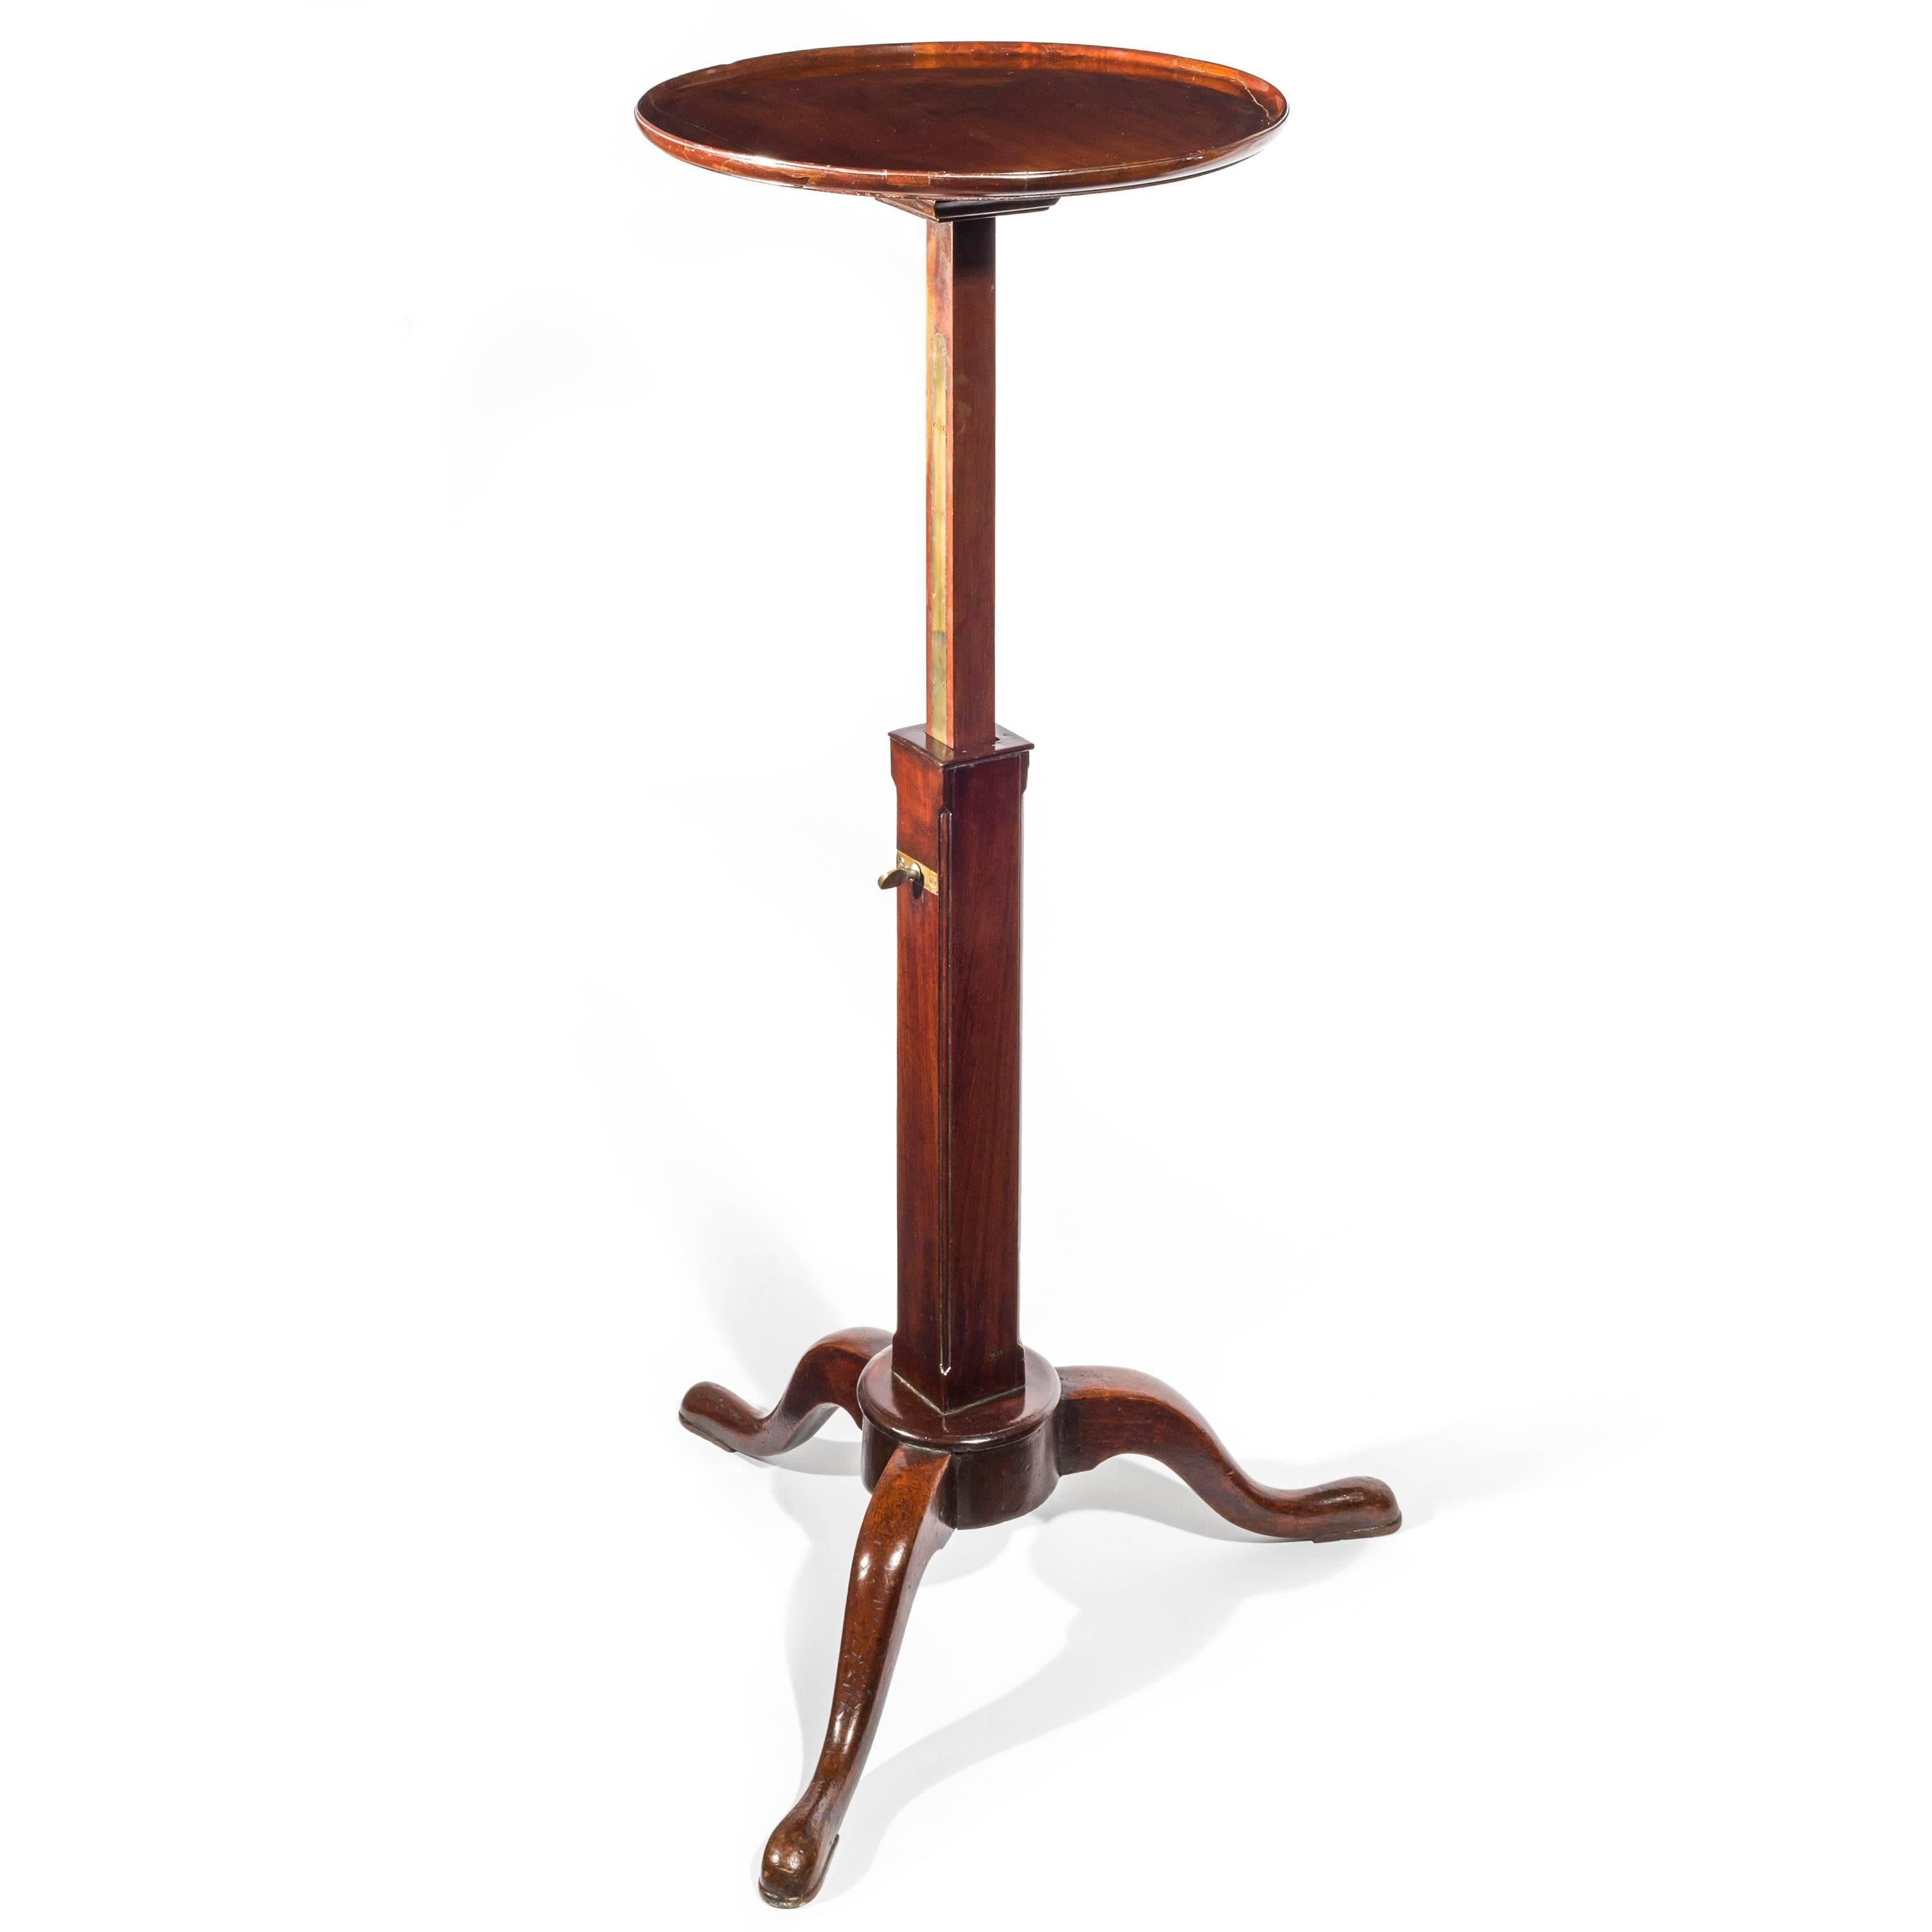 A rare and unusual George II Chippendale period telescopic table or stand in mahogany,

Scottish, circa 1754.

The circular dished top above an extending square column of the telescopic action, having moulded corners and raised on a tripod base with